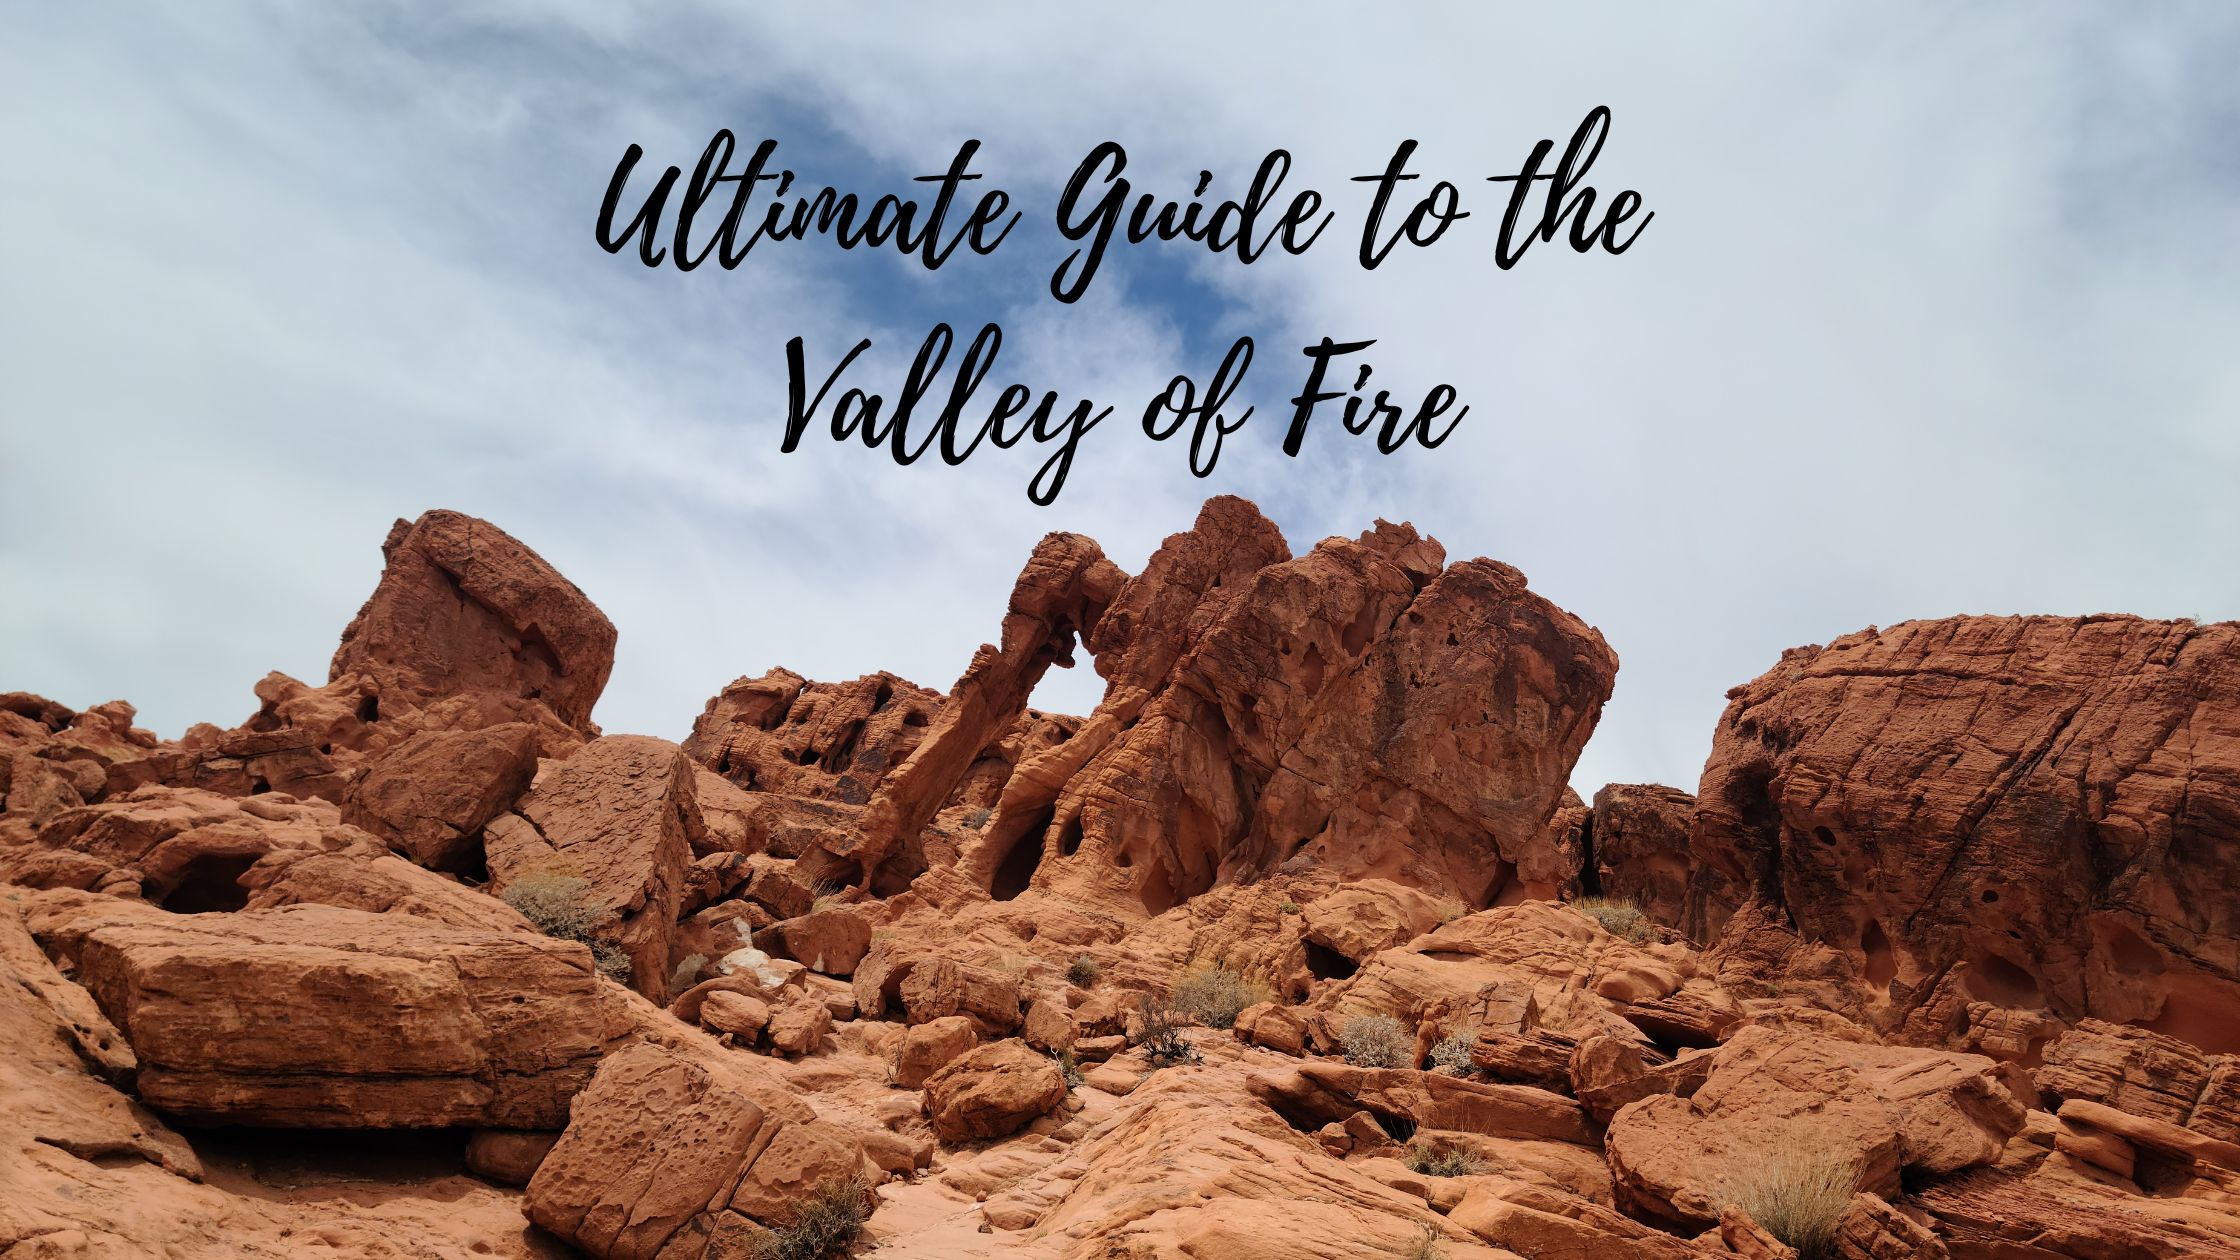 Ultimate Guide to the Valley of Fire